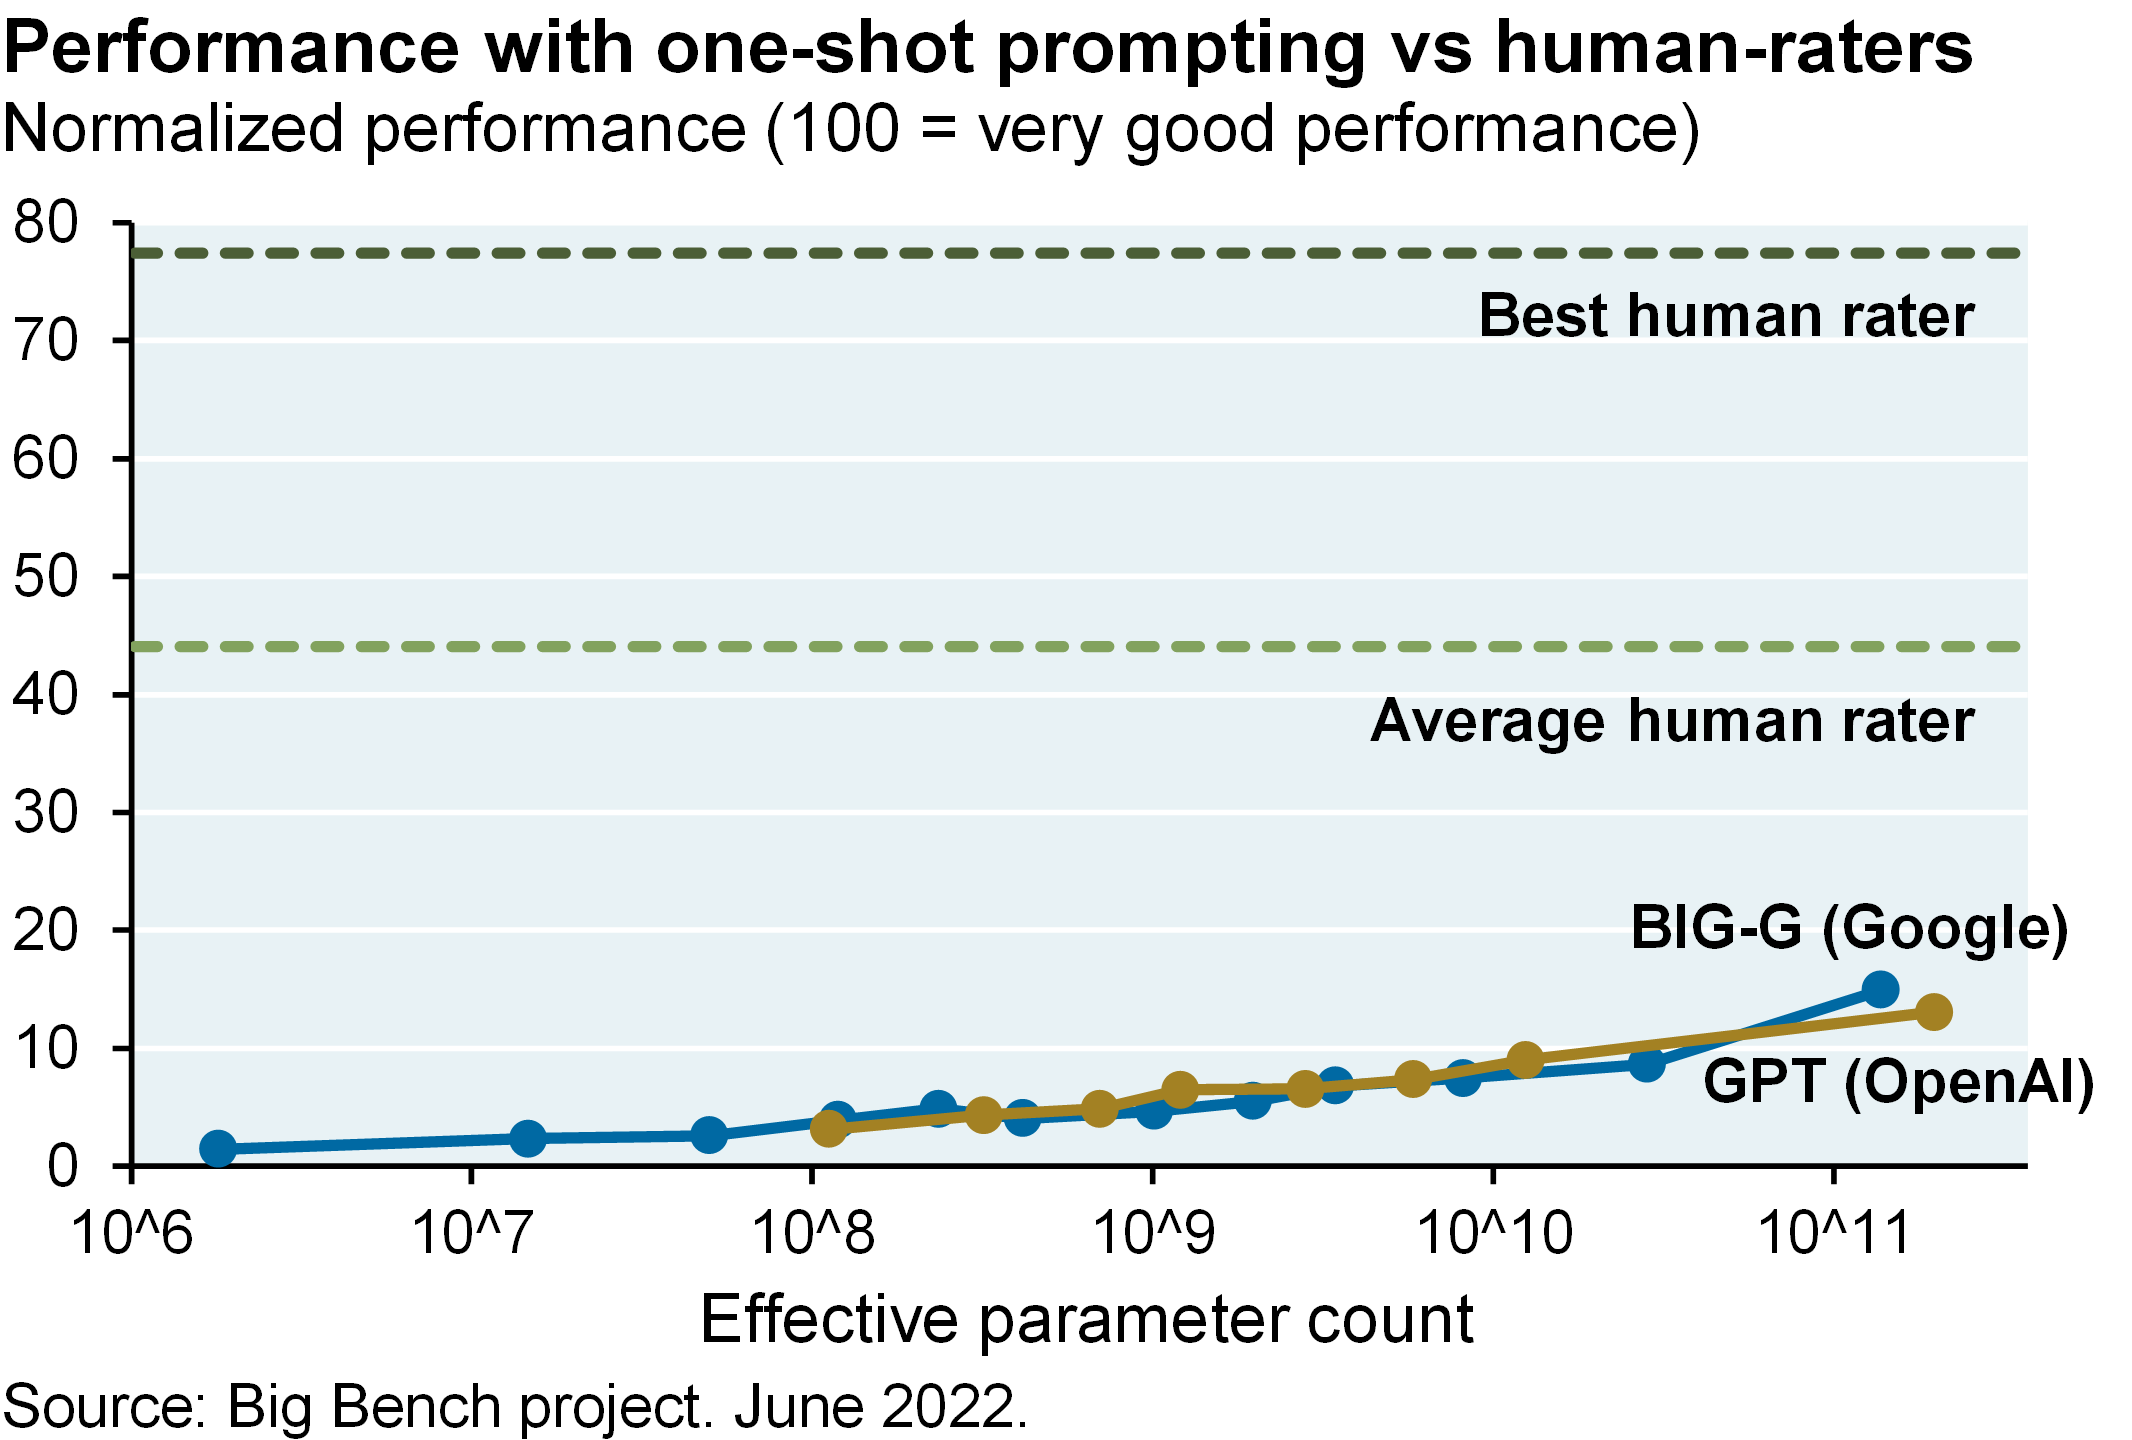 Line chart shows the normalized performance (from 0 to 100, with 100 representing very good performance) with one-shot prompting of Google’s BIG-G and OpenAI’s GPT on programmatic and JSON tasks and compares them to the average and best human rater performance. With over 100 trillion effective parameters, BIG-G and GPT both obtained scores under 15, whereas the average human rater scores at about 45 and the best human rater scores almost 80.